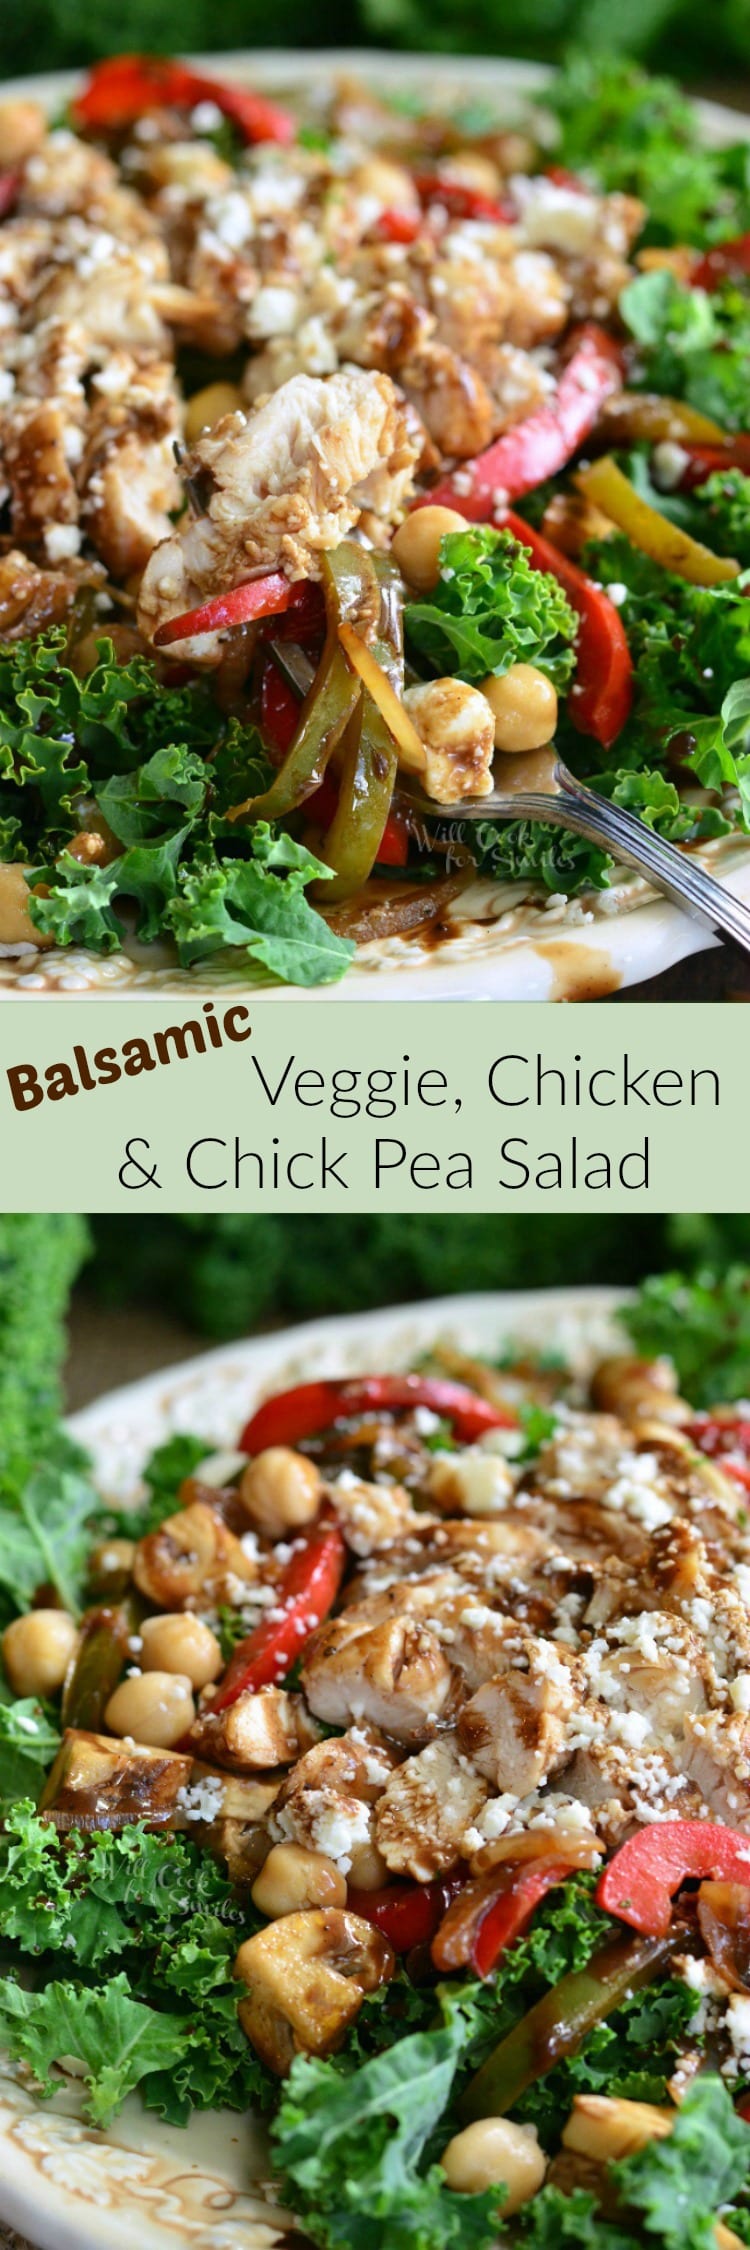 Balsamic Chicken, Veggies, and Chick Pea Salad. Kale salad topped with chicken and veggies that have been sauteed in balsamic dressing, chick peas, and finally, lots of feta cheese.